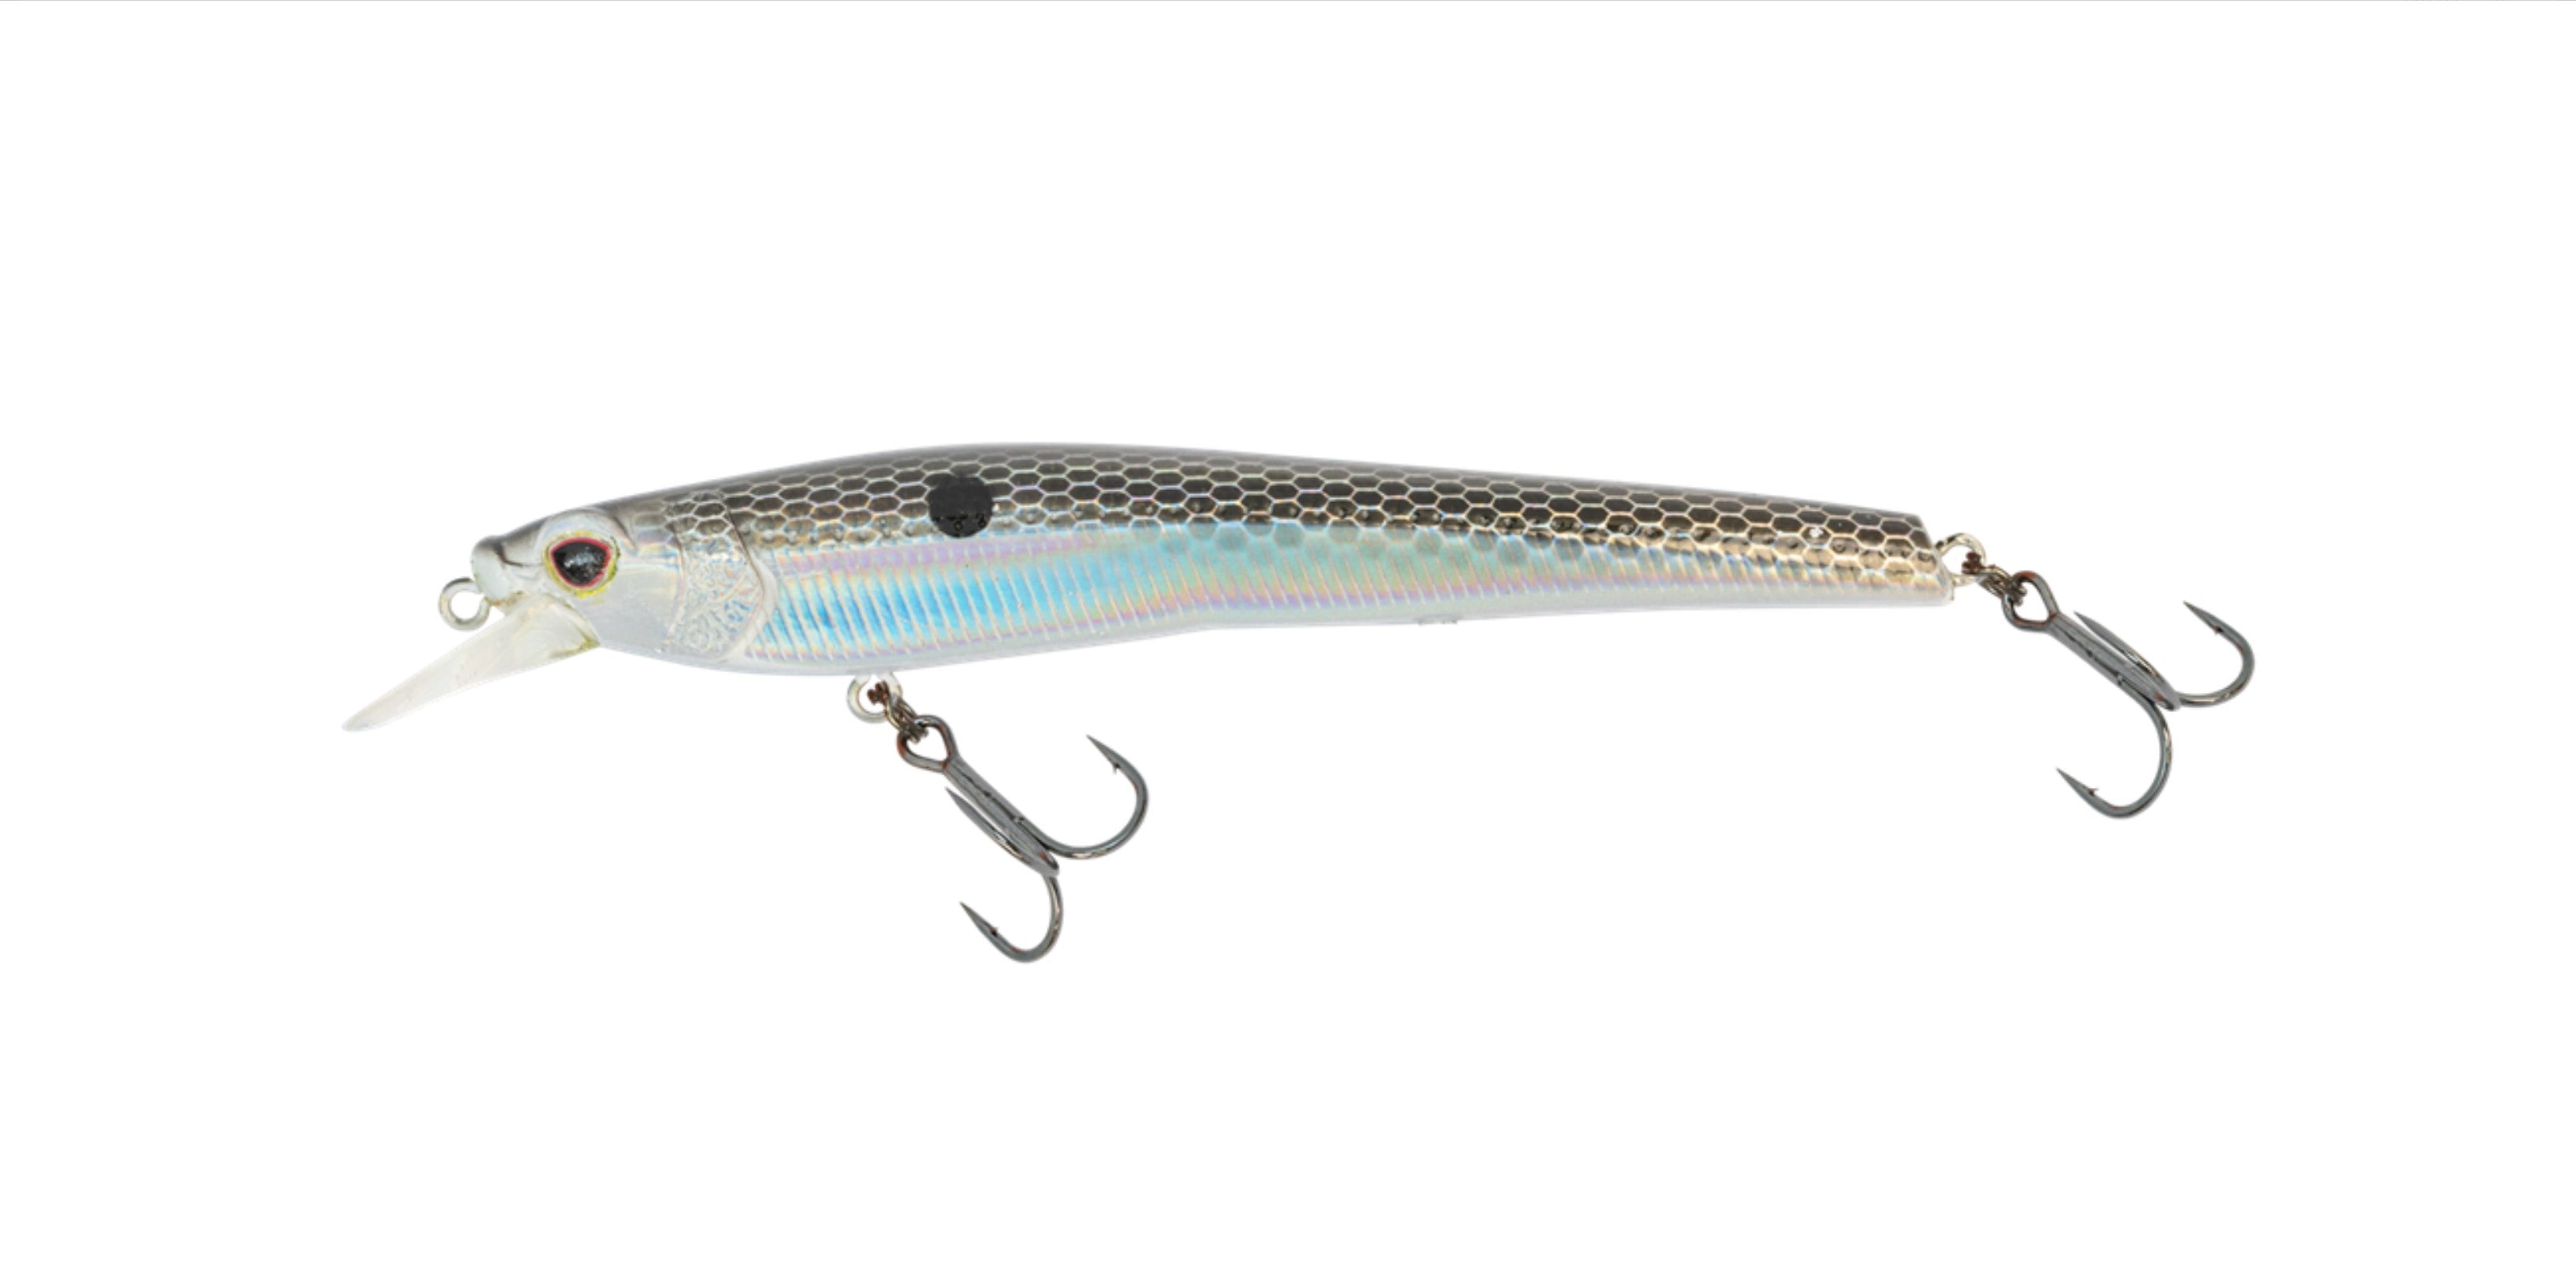 Nomad Design – Trophy Trout Lures and Fly Fishing